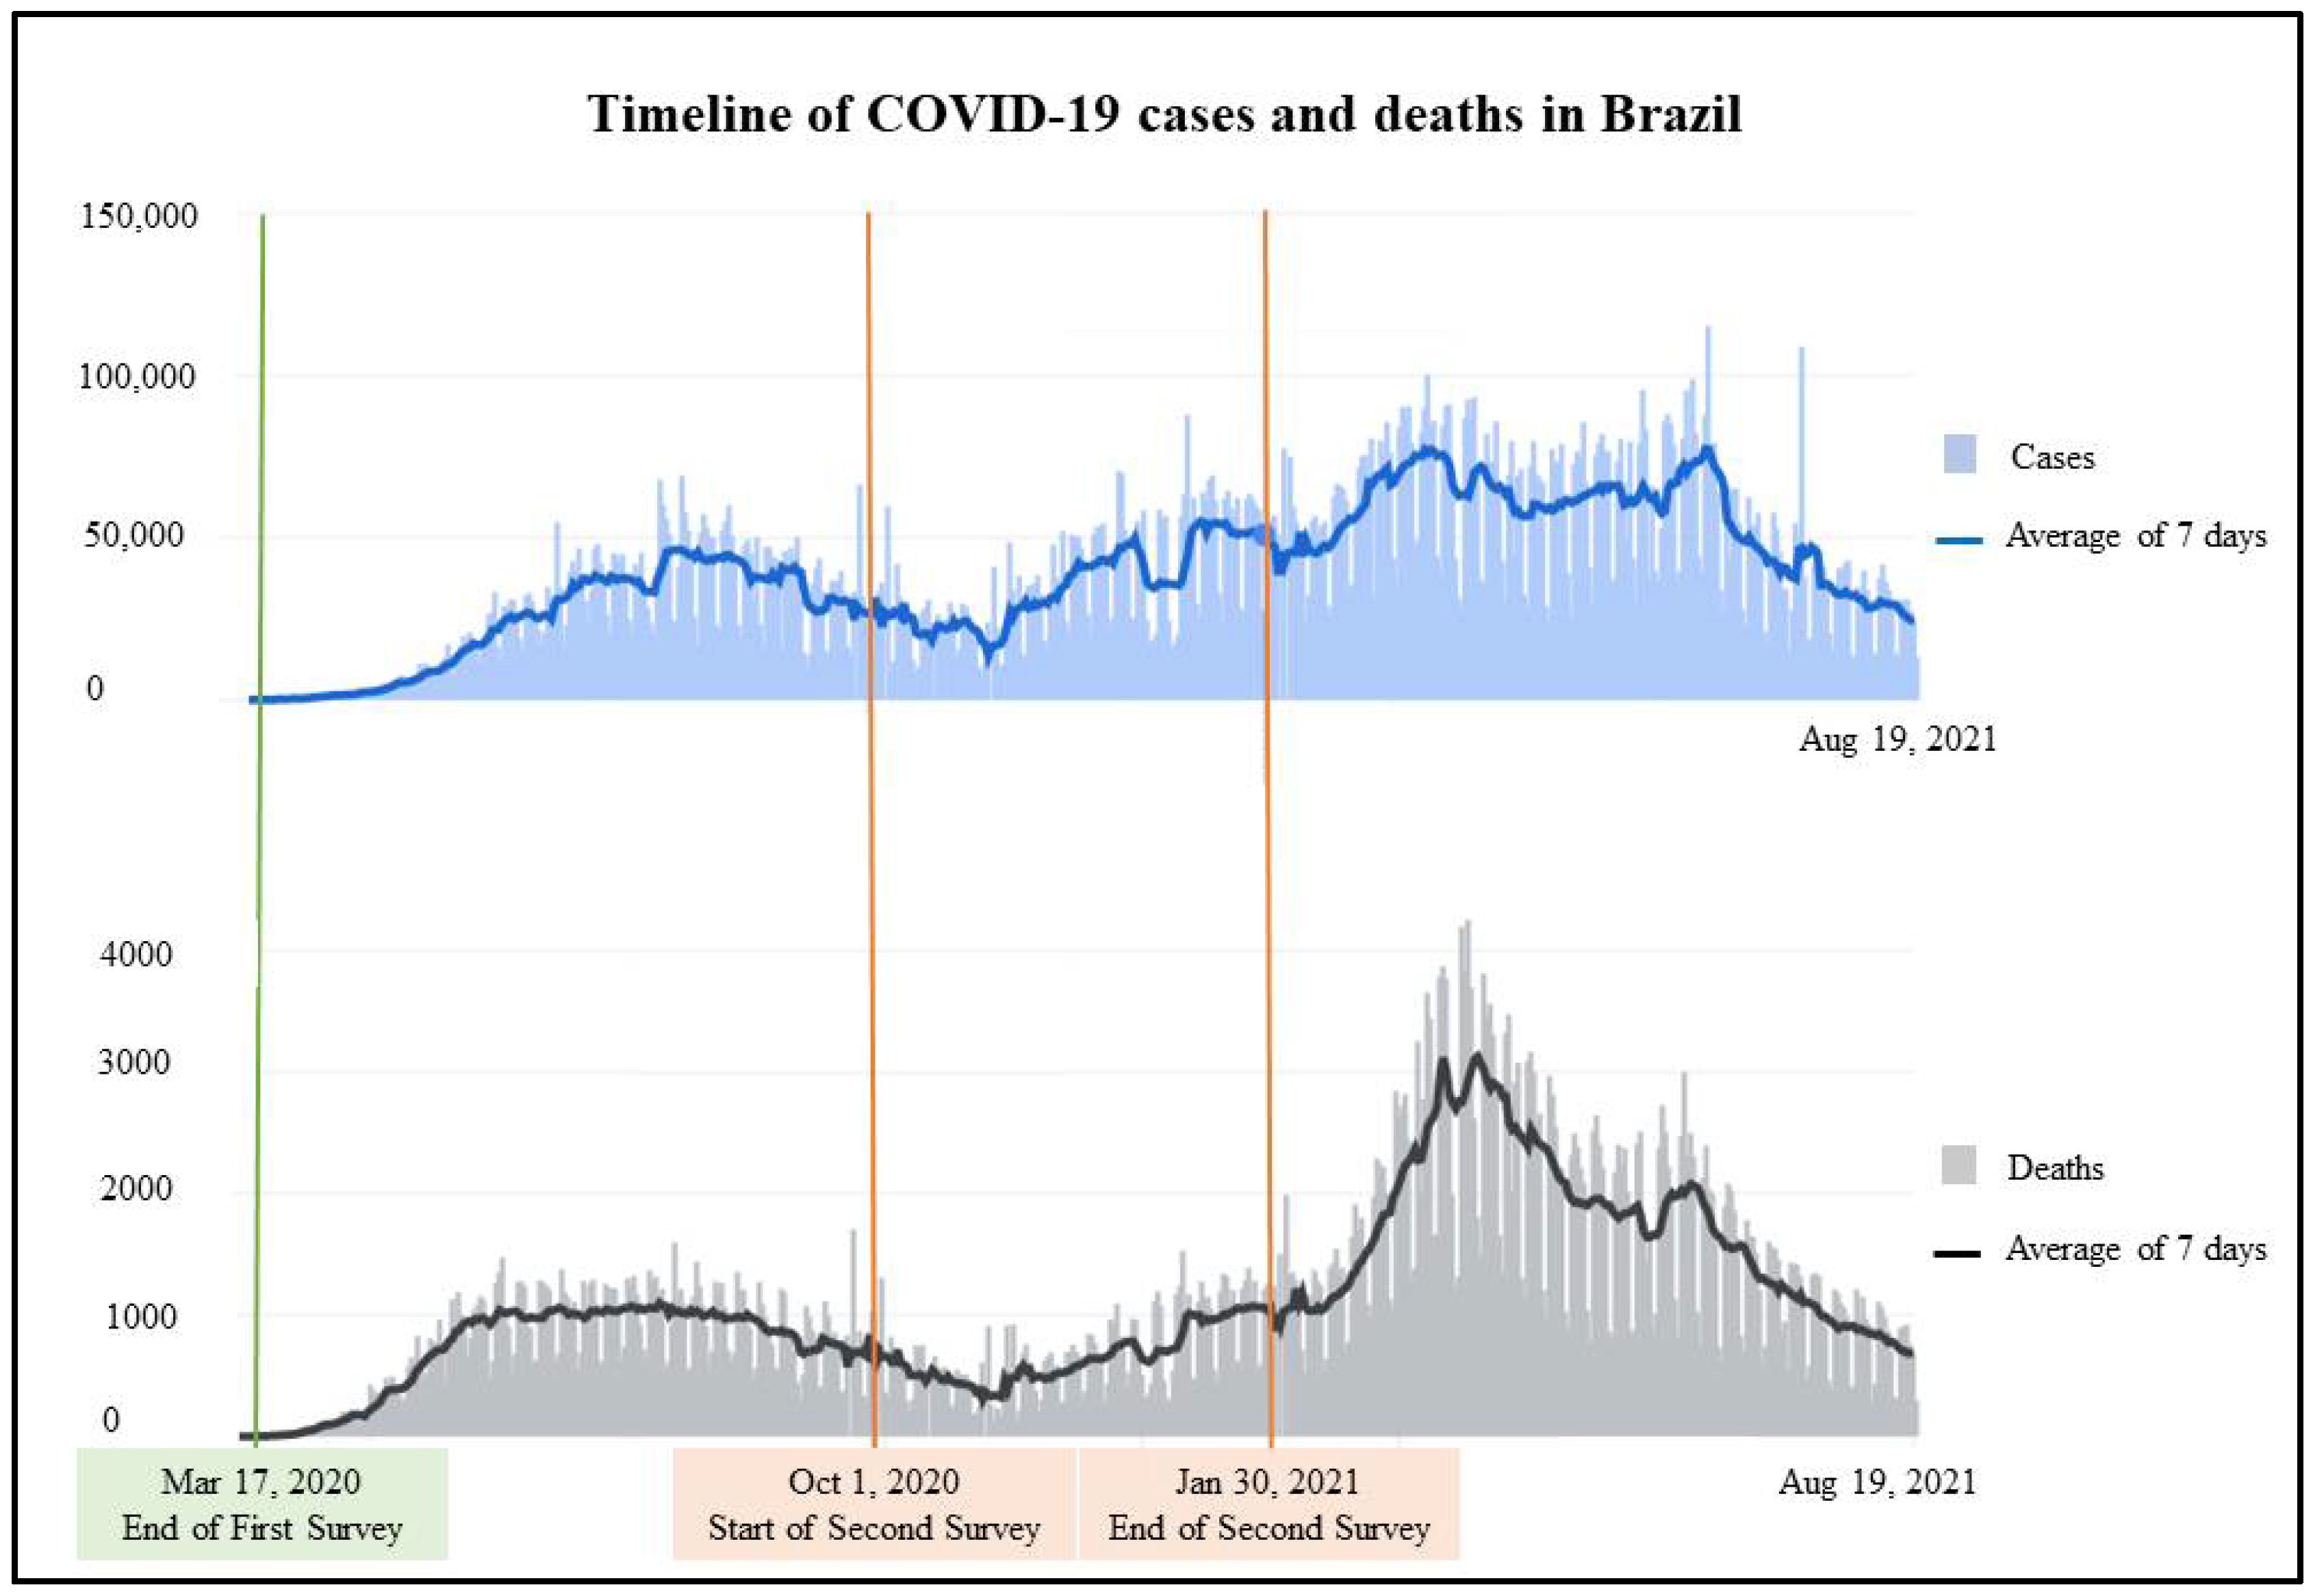 The impact of Brazil's transport network on the spread of COVID-19